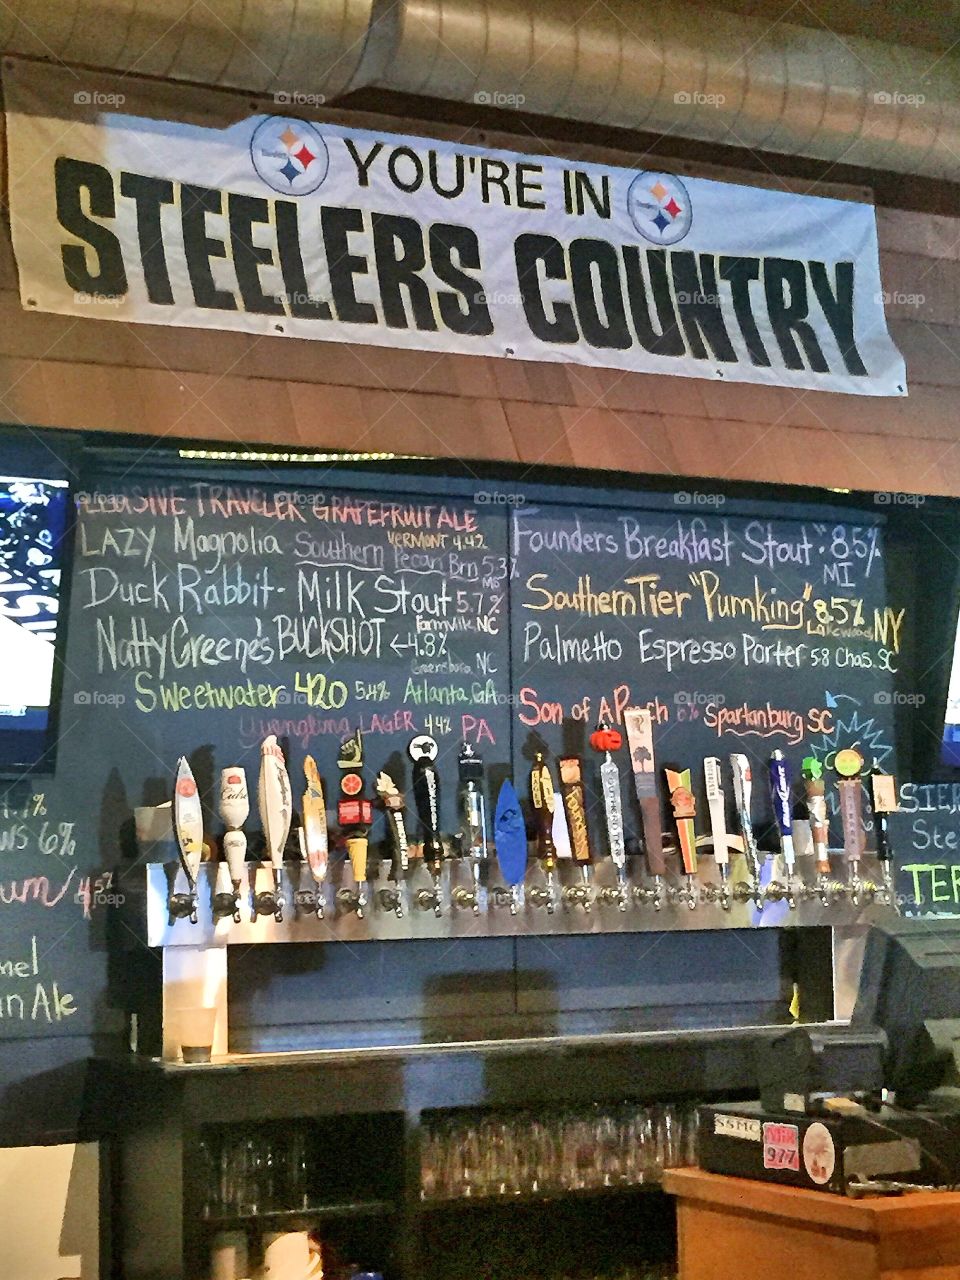 Even though you may be in South Carolina you're still in Steelers country! The Boathouse in Myrtle Beach South Carolina.